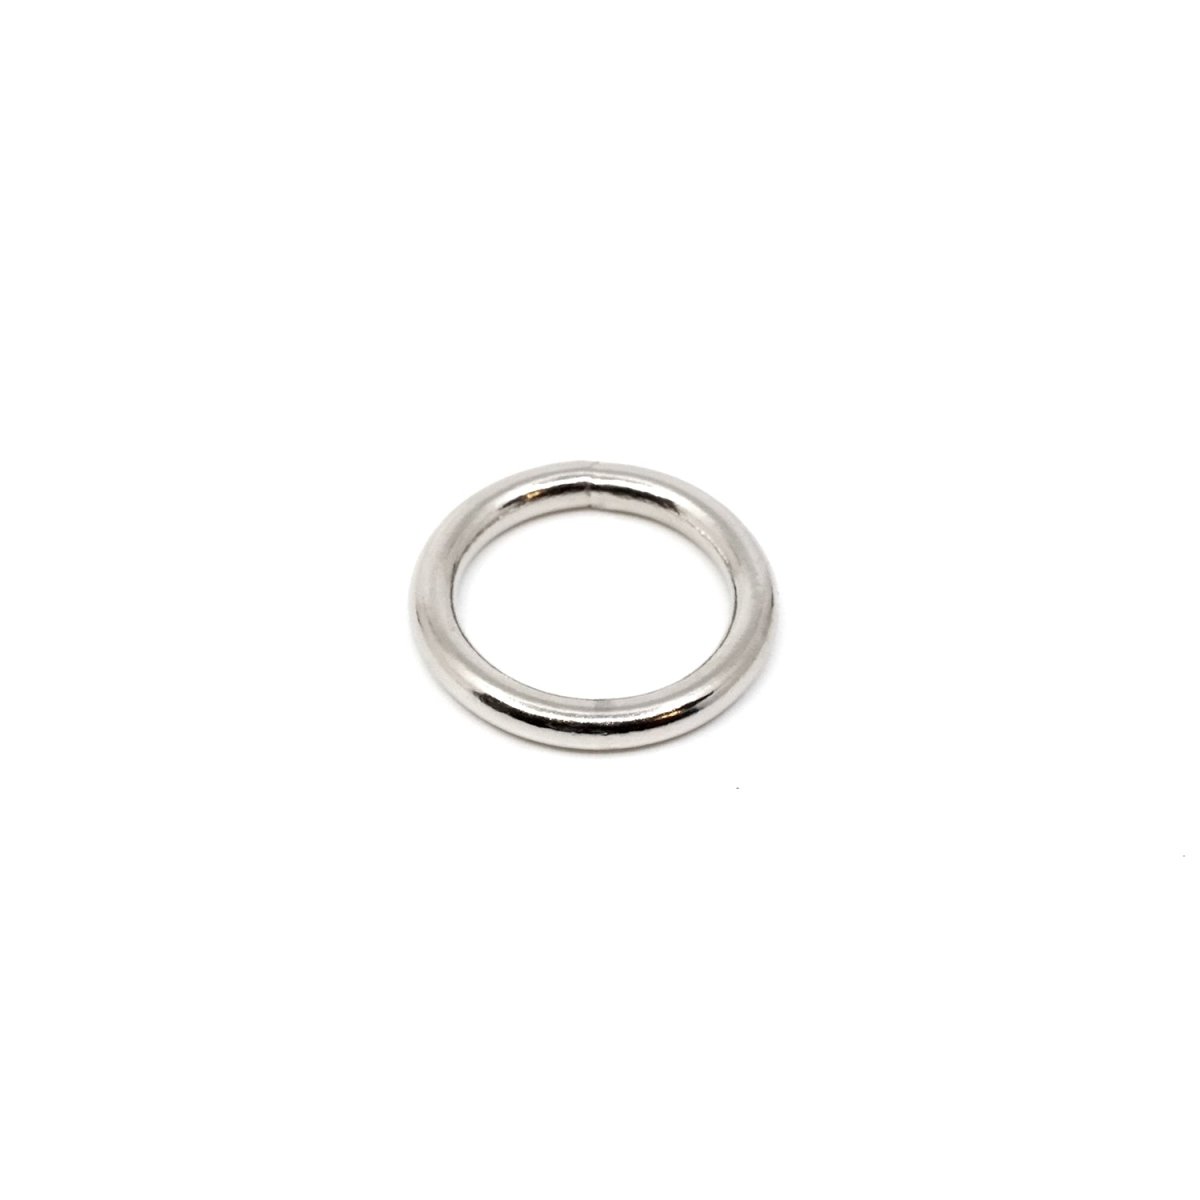 A mini connecting ring made of nickel-plated steel